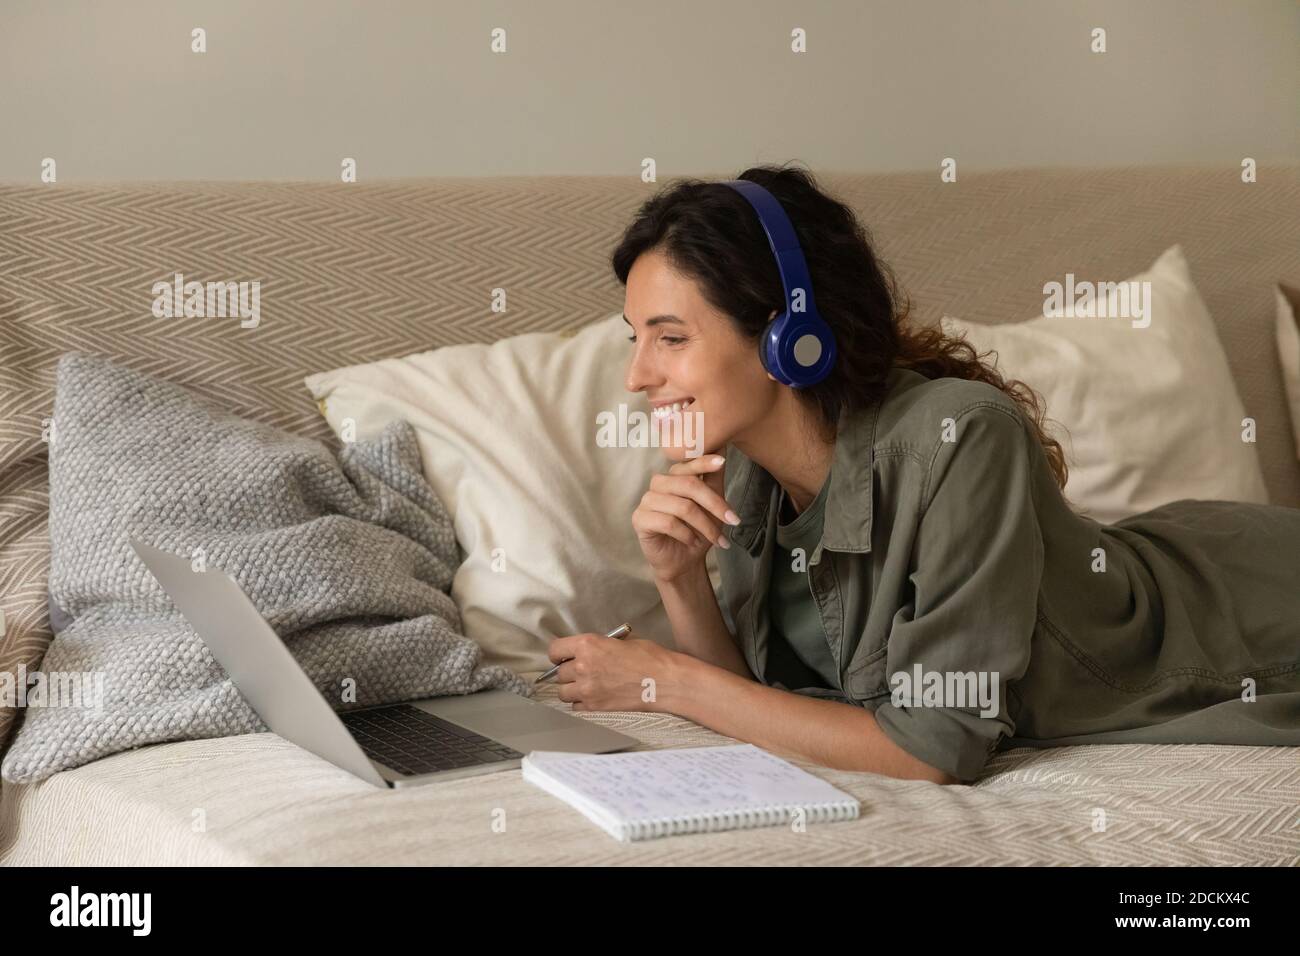 Smiling woman in headphones study online from home Stock Photo